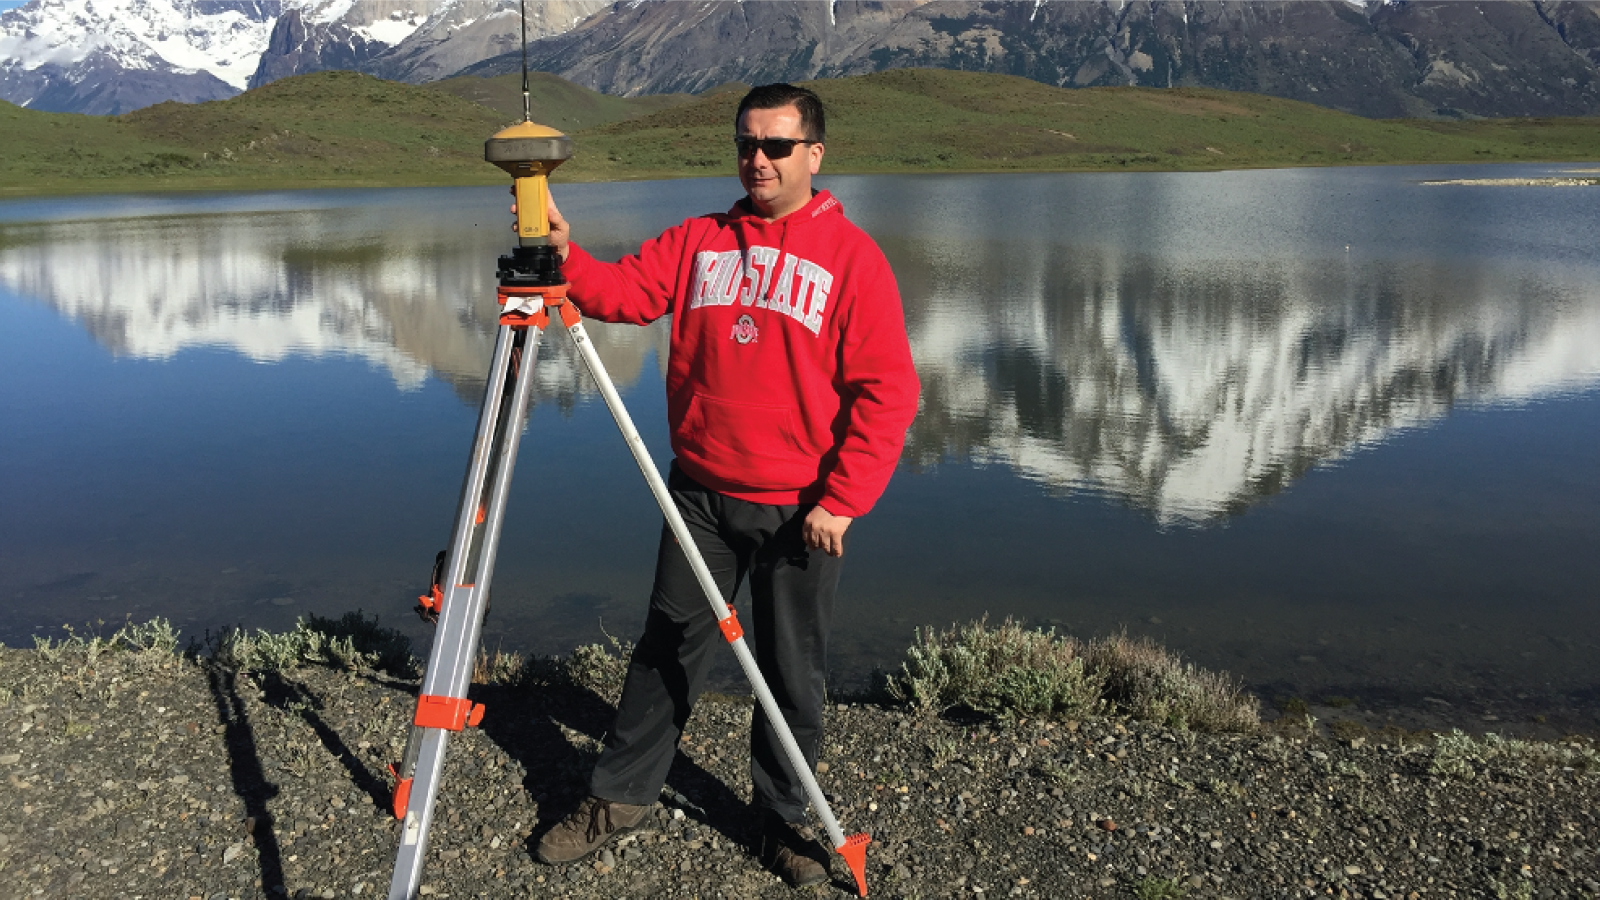 Julio carrying out field work in an OSU sweater in front of a mountain lake